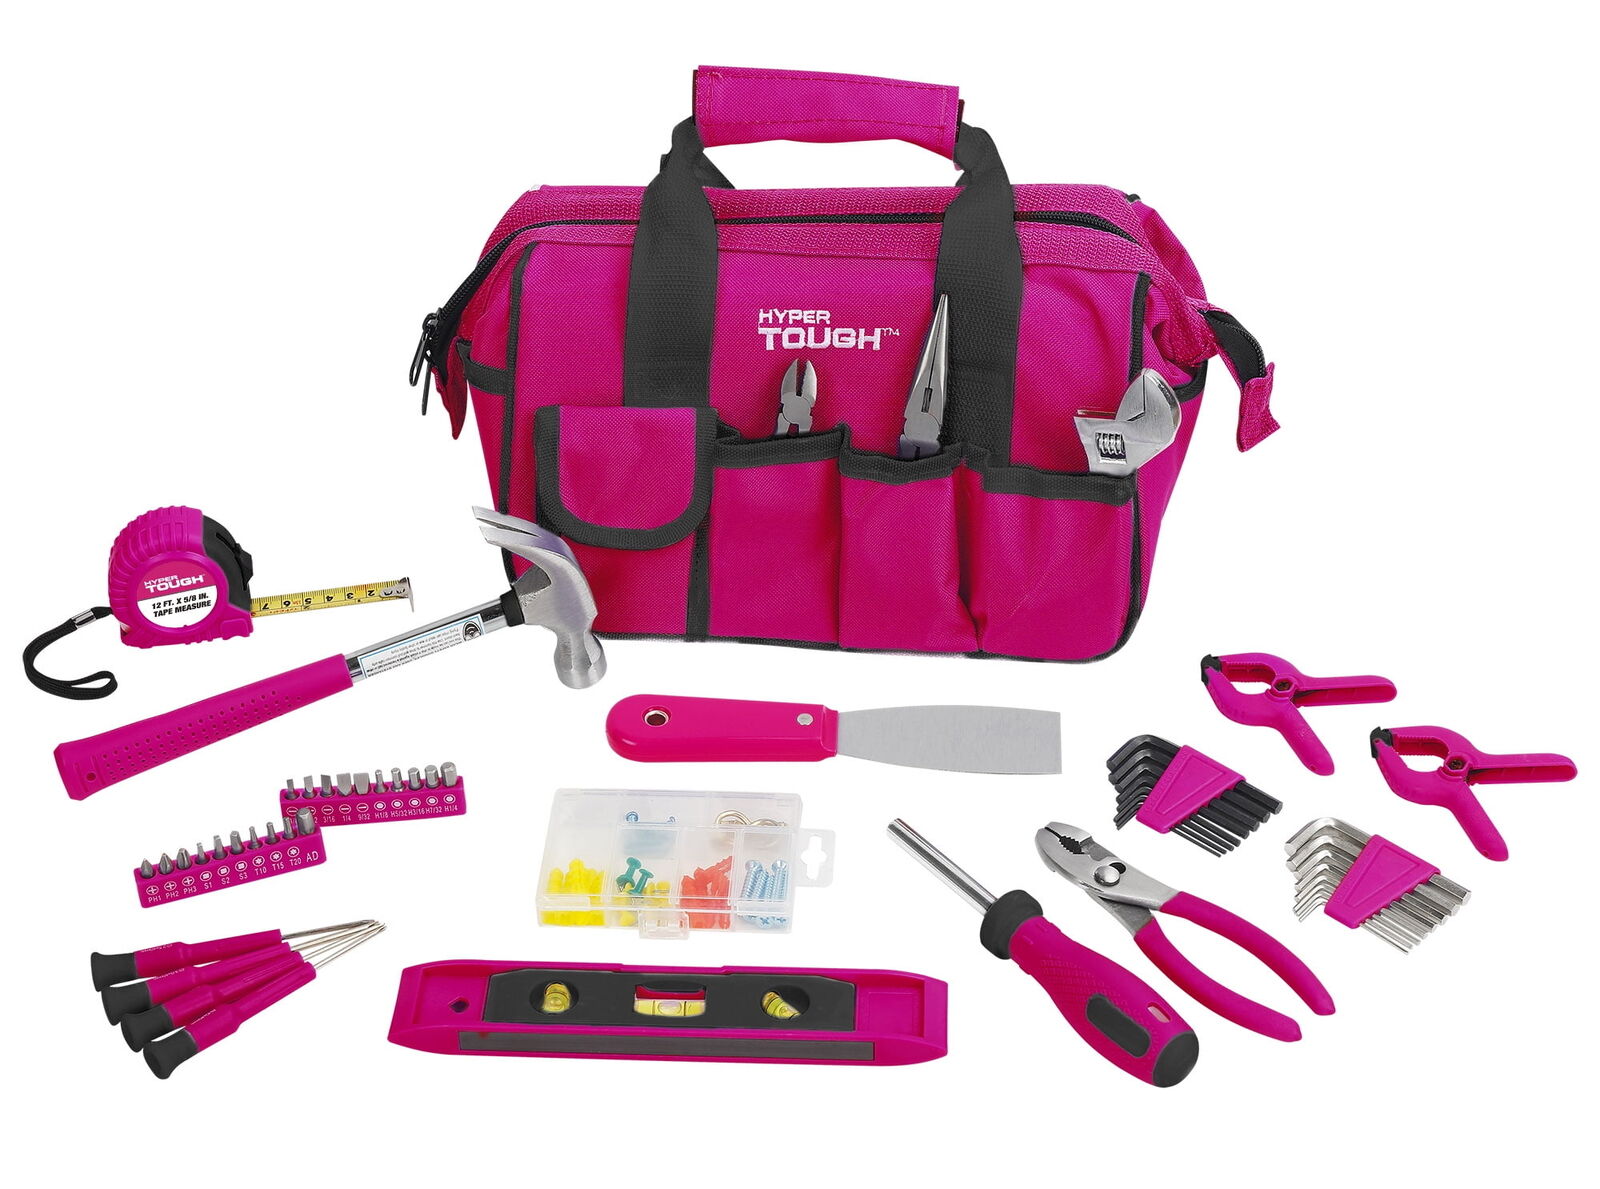 89-Piece Pink Household Tool Set, Gift for Mom